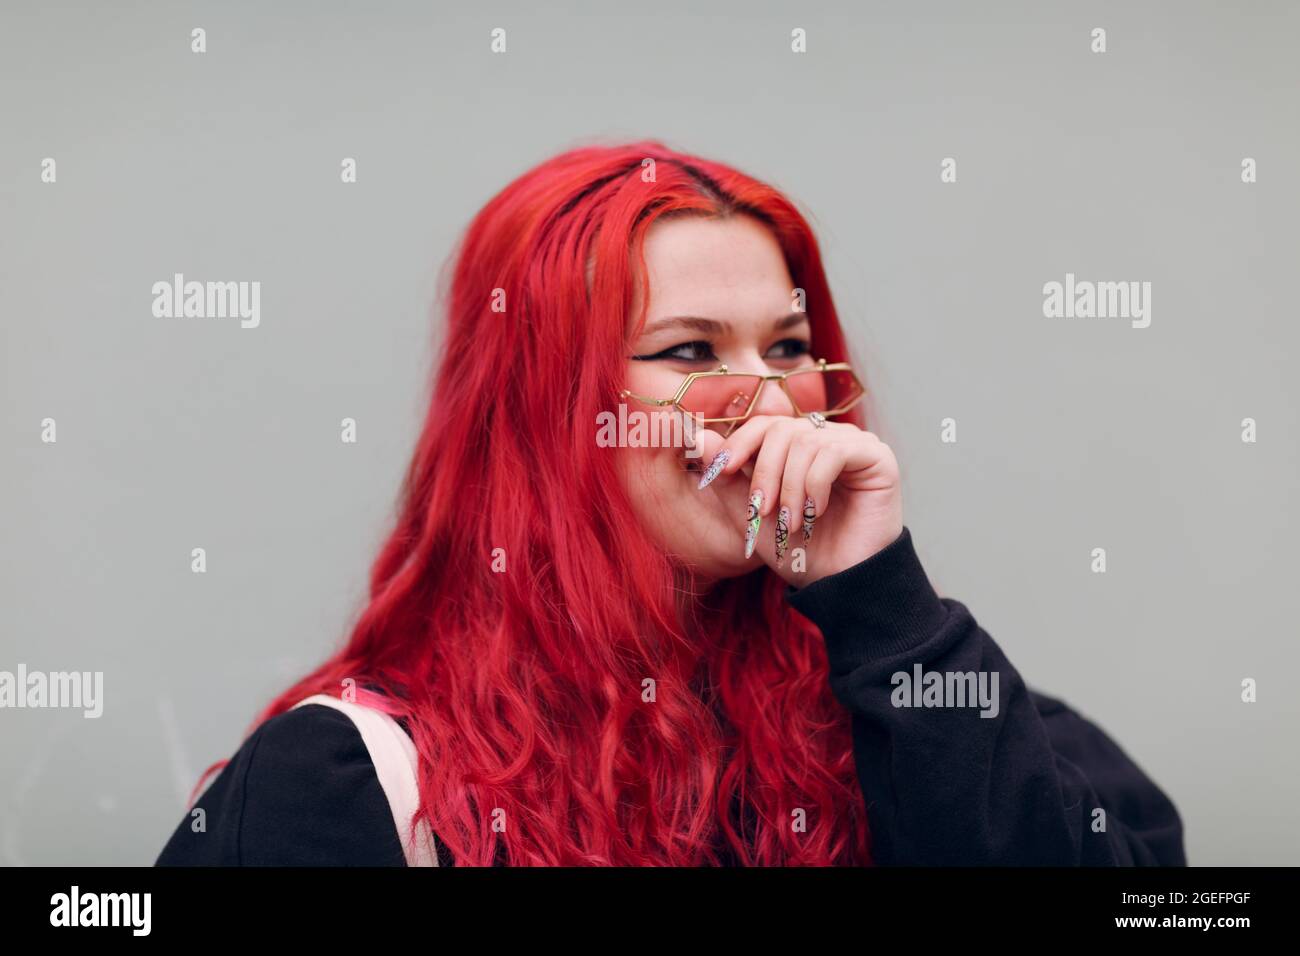 Plus size overweight fat body positive lgbtq woman with red hair and pink  glasses Stock Photo - Alamy